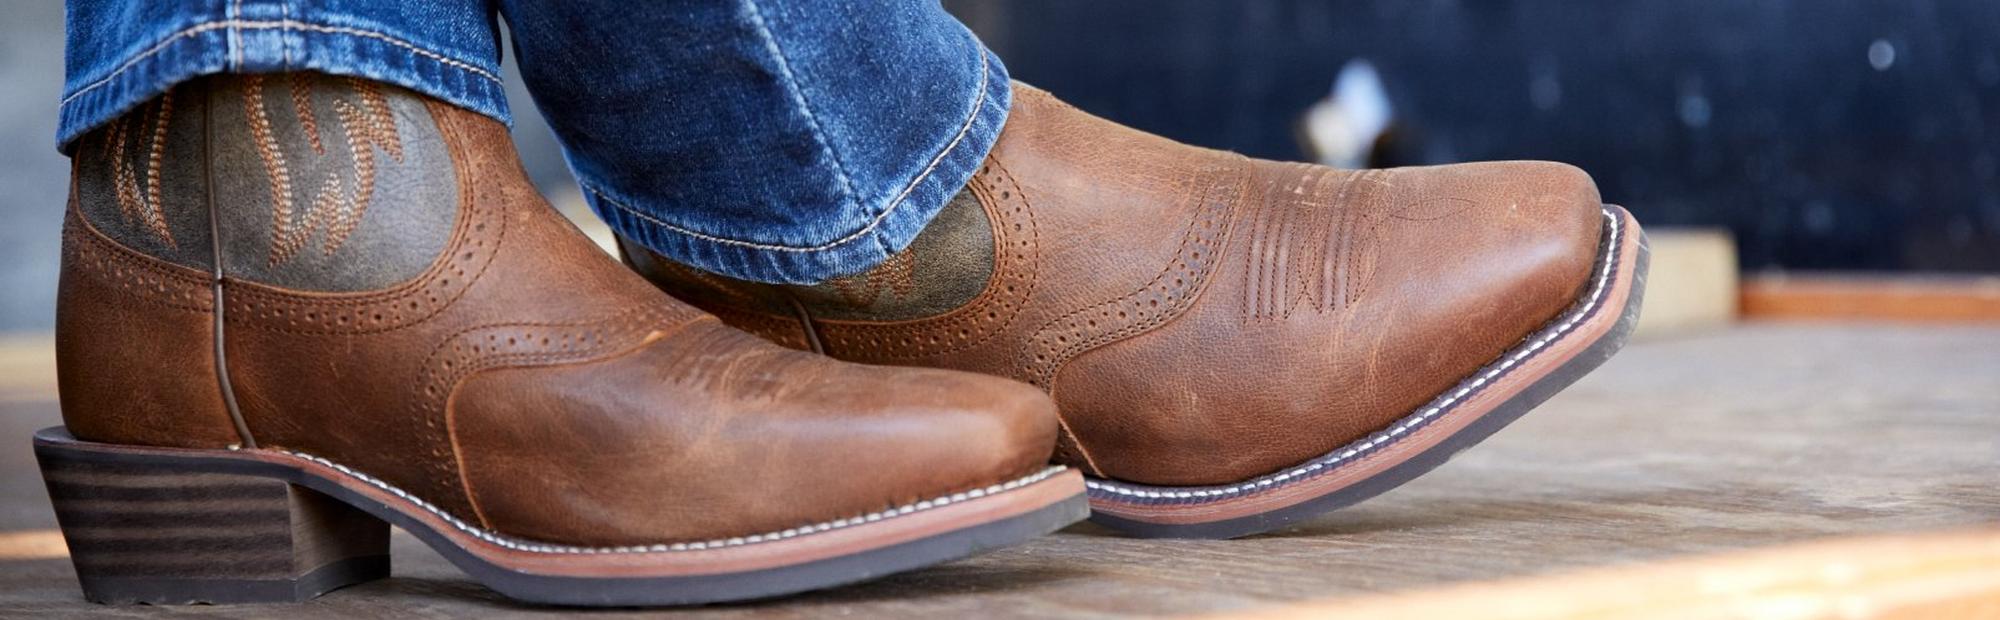 How to Clean Cowboy Boots - Leather Cowboy Boot Care